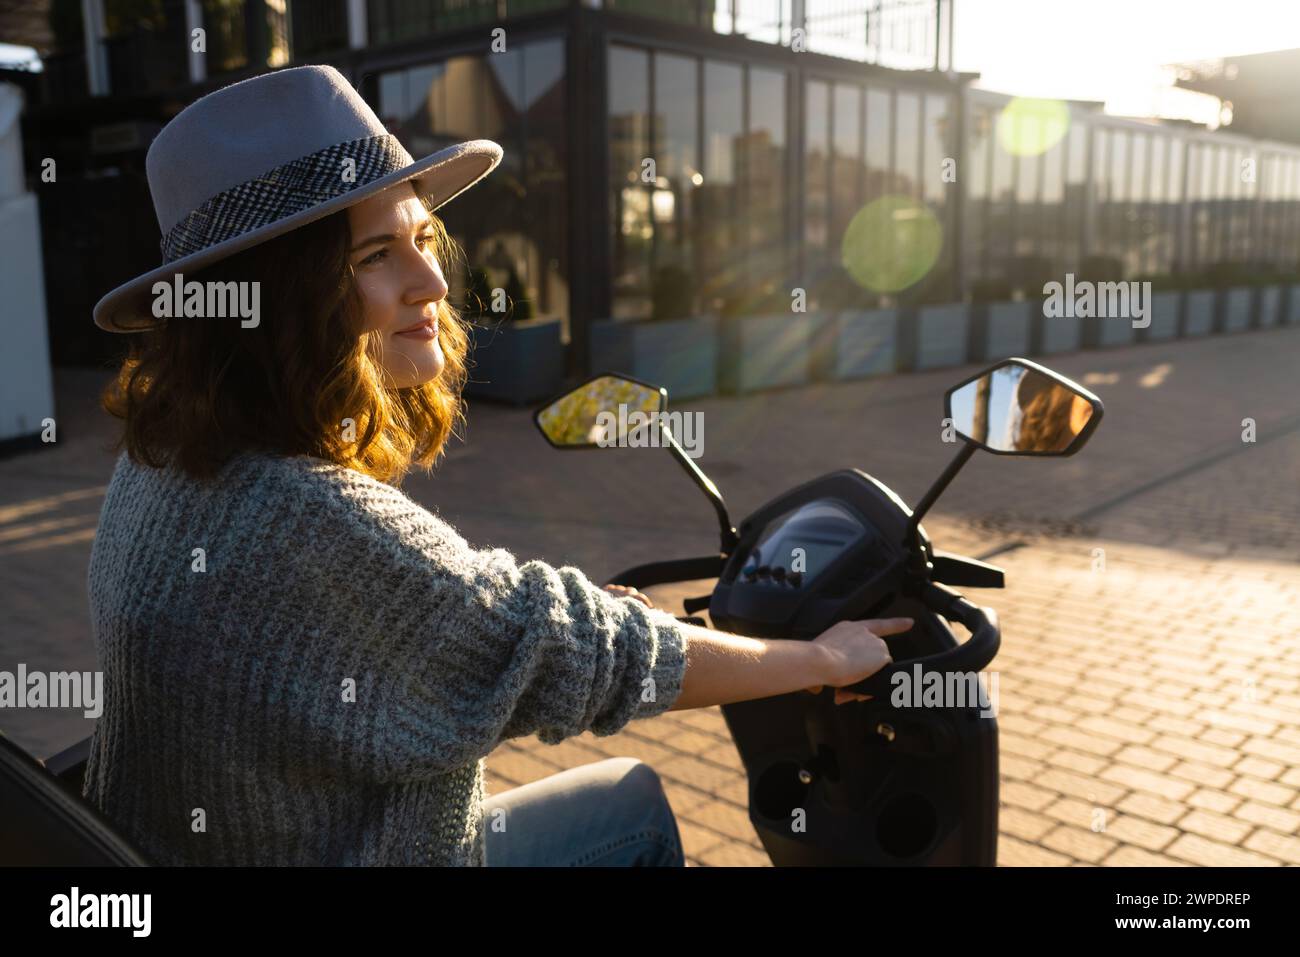 Woman tourist riding a four wheel mobility electric scooter on a city street.. Stock Photo